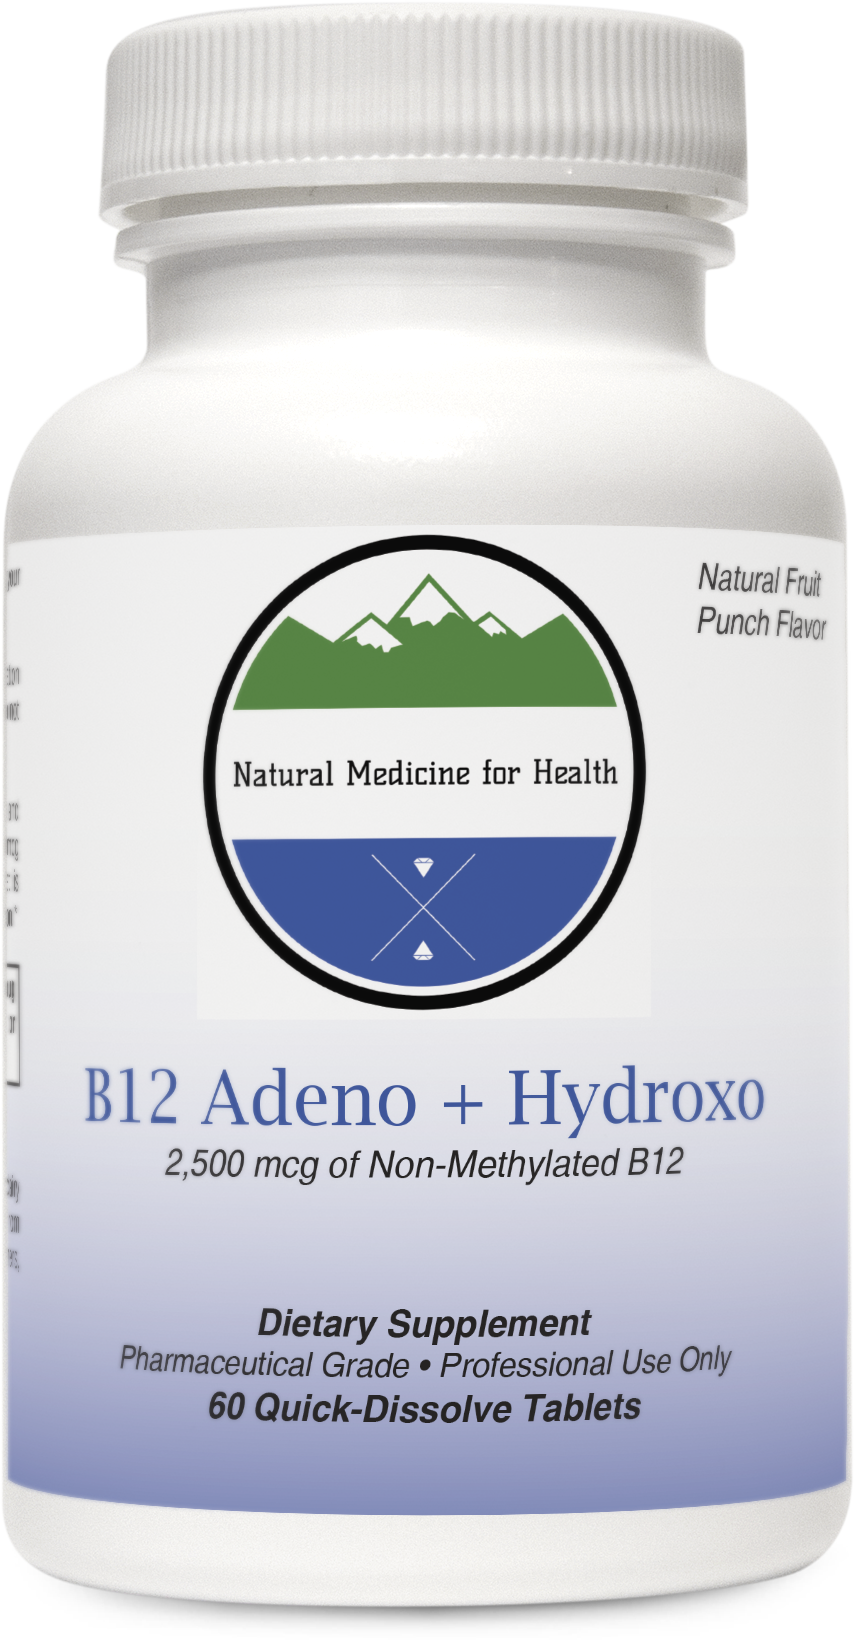 Natural Medicine for Health, B12 Adeno + Hydroxo Natural Fruit Punch Flavor 60 Tablets